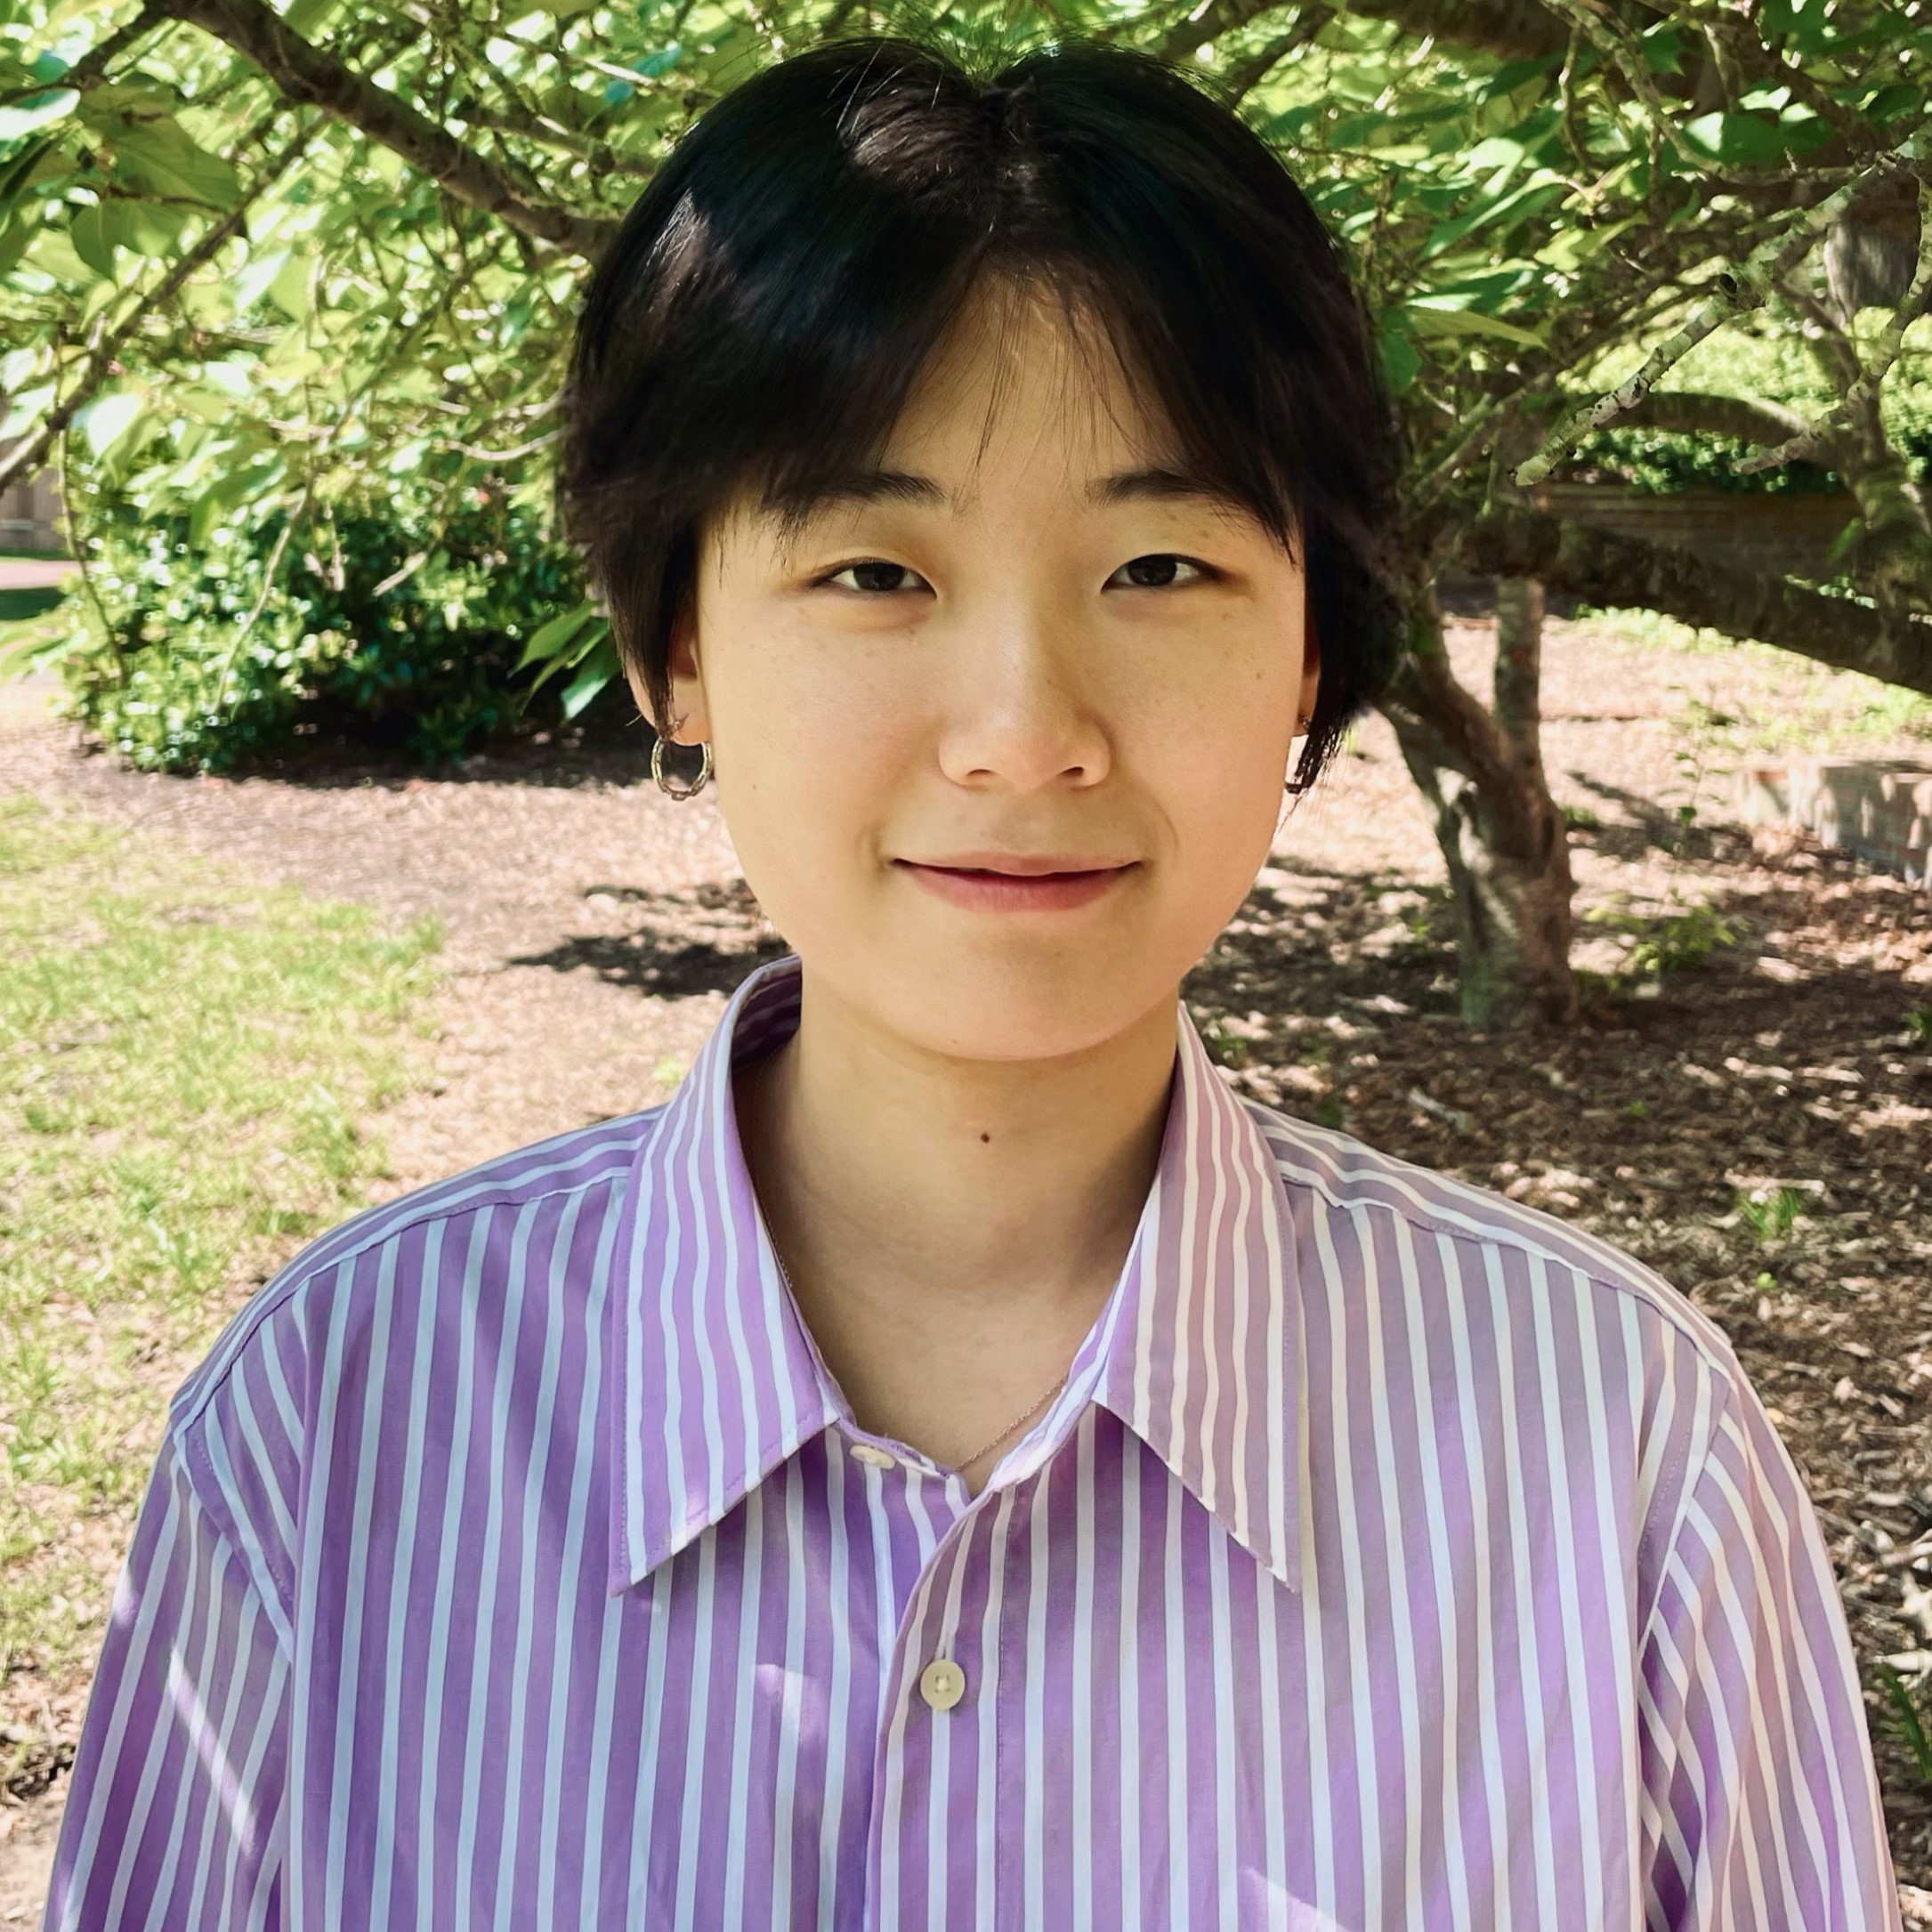 Headshot of Master's Student Yifan Yuan wearing a pink and white striped shirt and standing in front of a tree